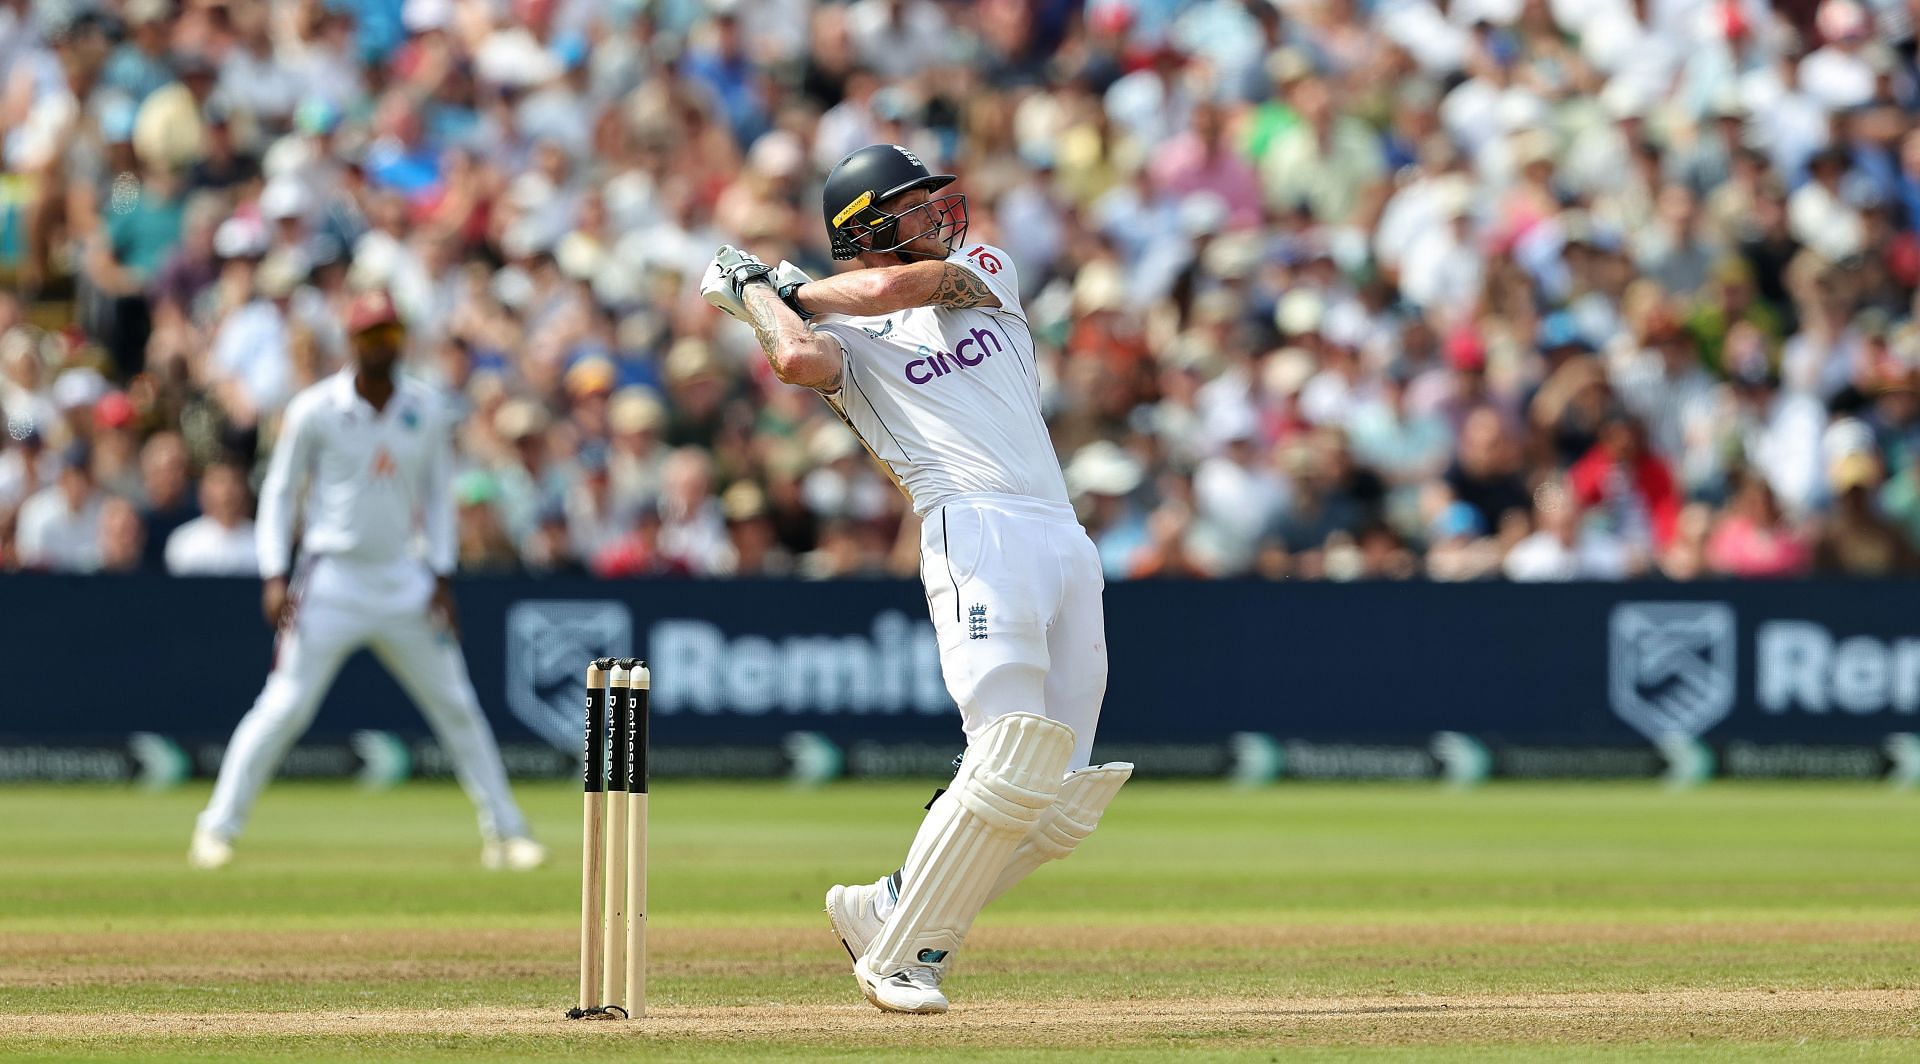 [Watch] Ben Stokes hammers fastest Test fifty by an England player on day 3 of ENG vs WI 3rd Test